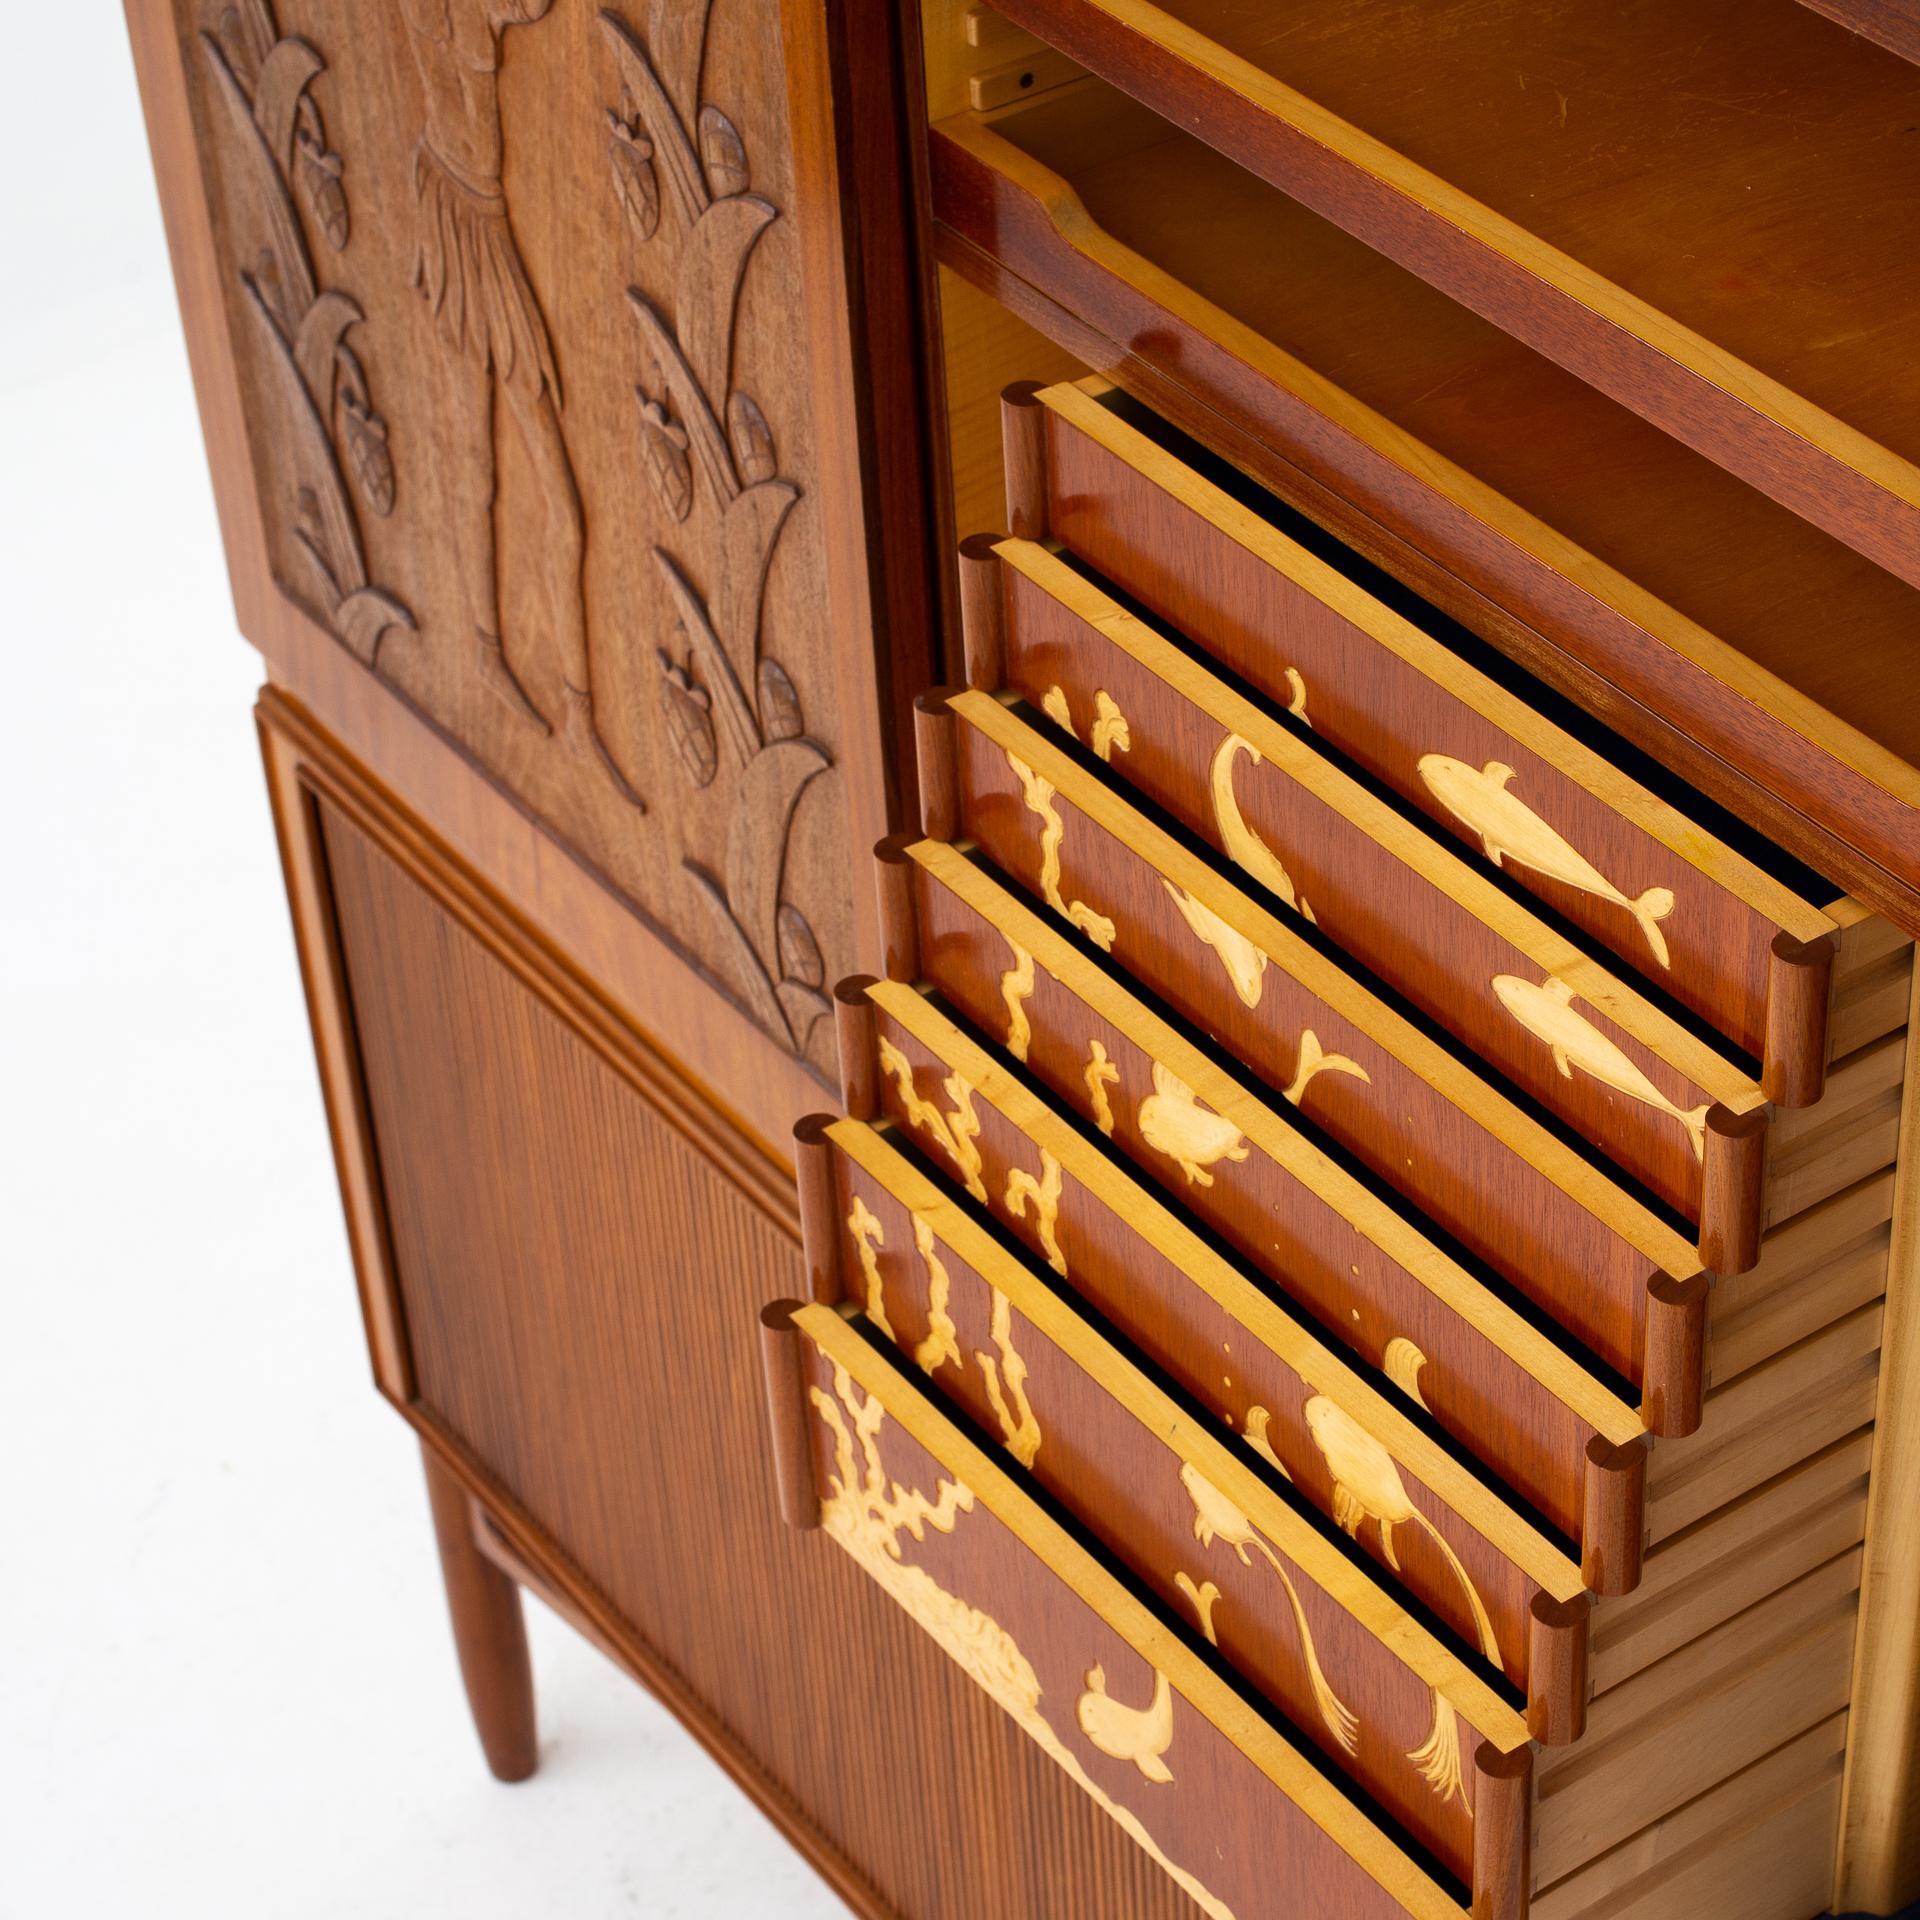 Unique linen-press in Honduras-mahogany with tambour and decorative carvings, from 1950. Maker Arnold Petersen.